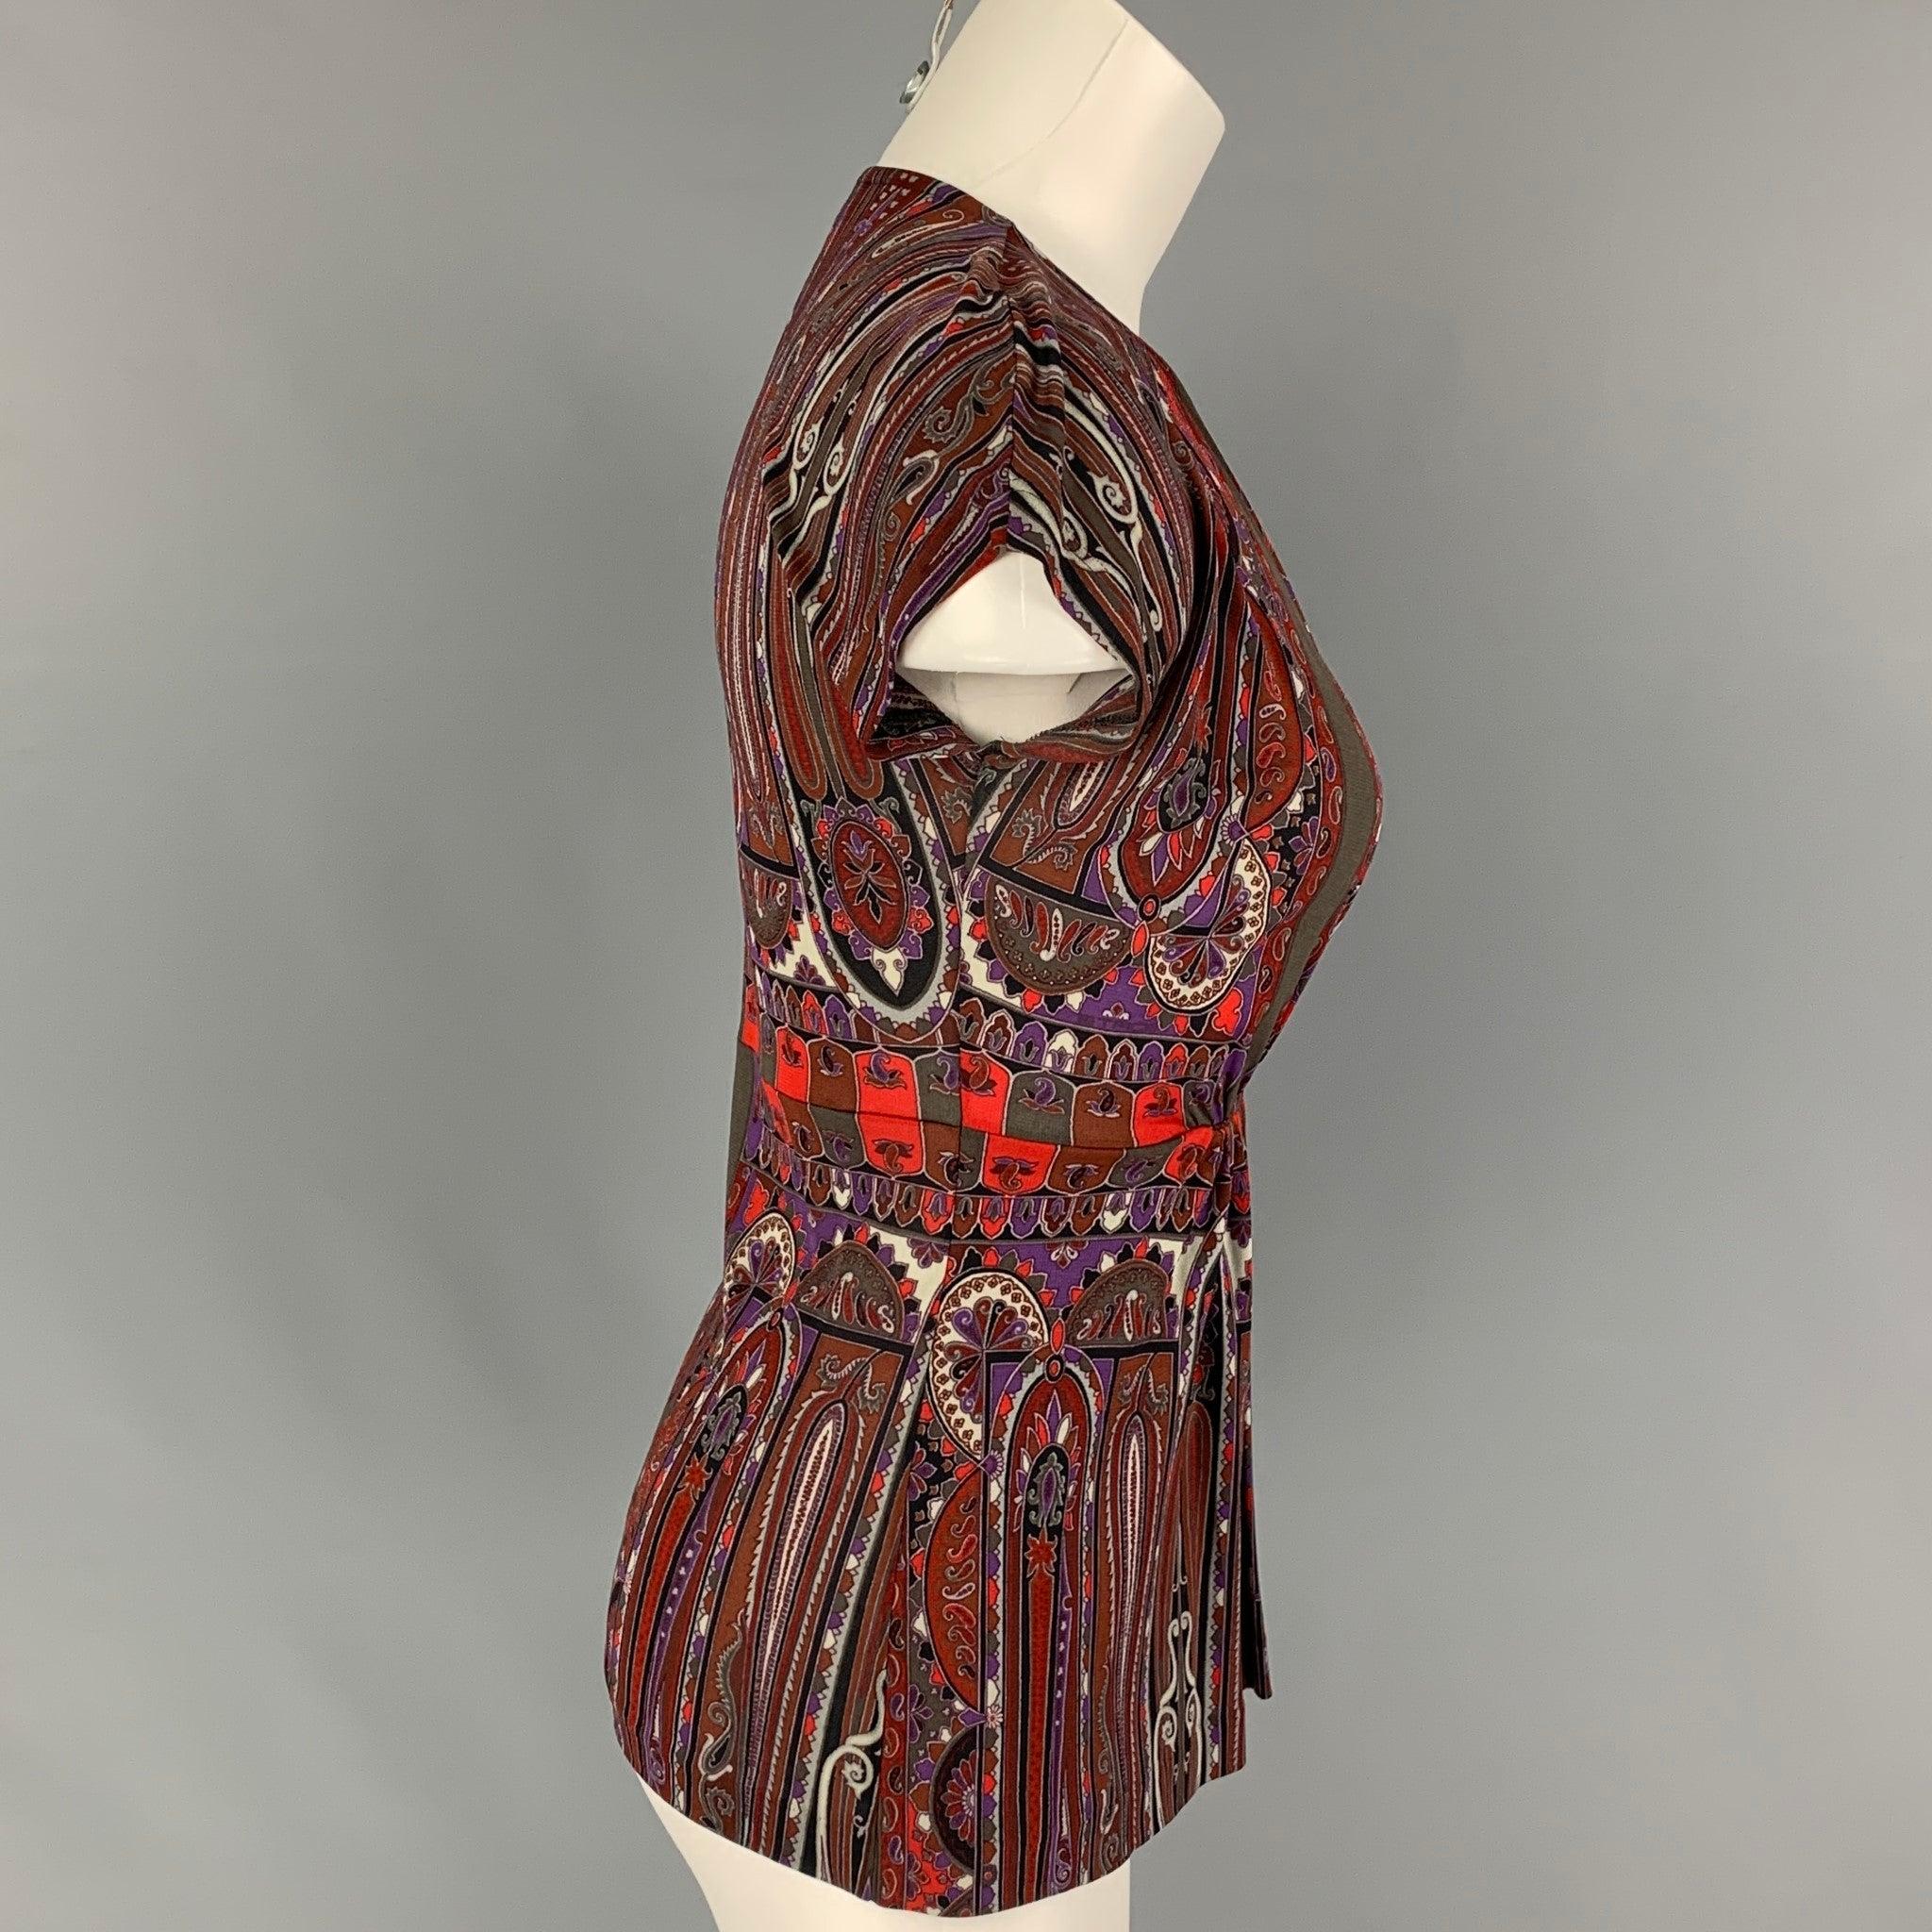 ETRO top comes in a brown & red paisley rayon featuring a elastic detail and a v-neck. Made in Italy.
Very Good
Pre-Owned Condition. 

Marked:   40 

Measurements: 
 
Shoulder: 16 inches  Bust: 30 inches  Sleeve: 2.5 inches  Length: 23 inches 
  
 